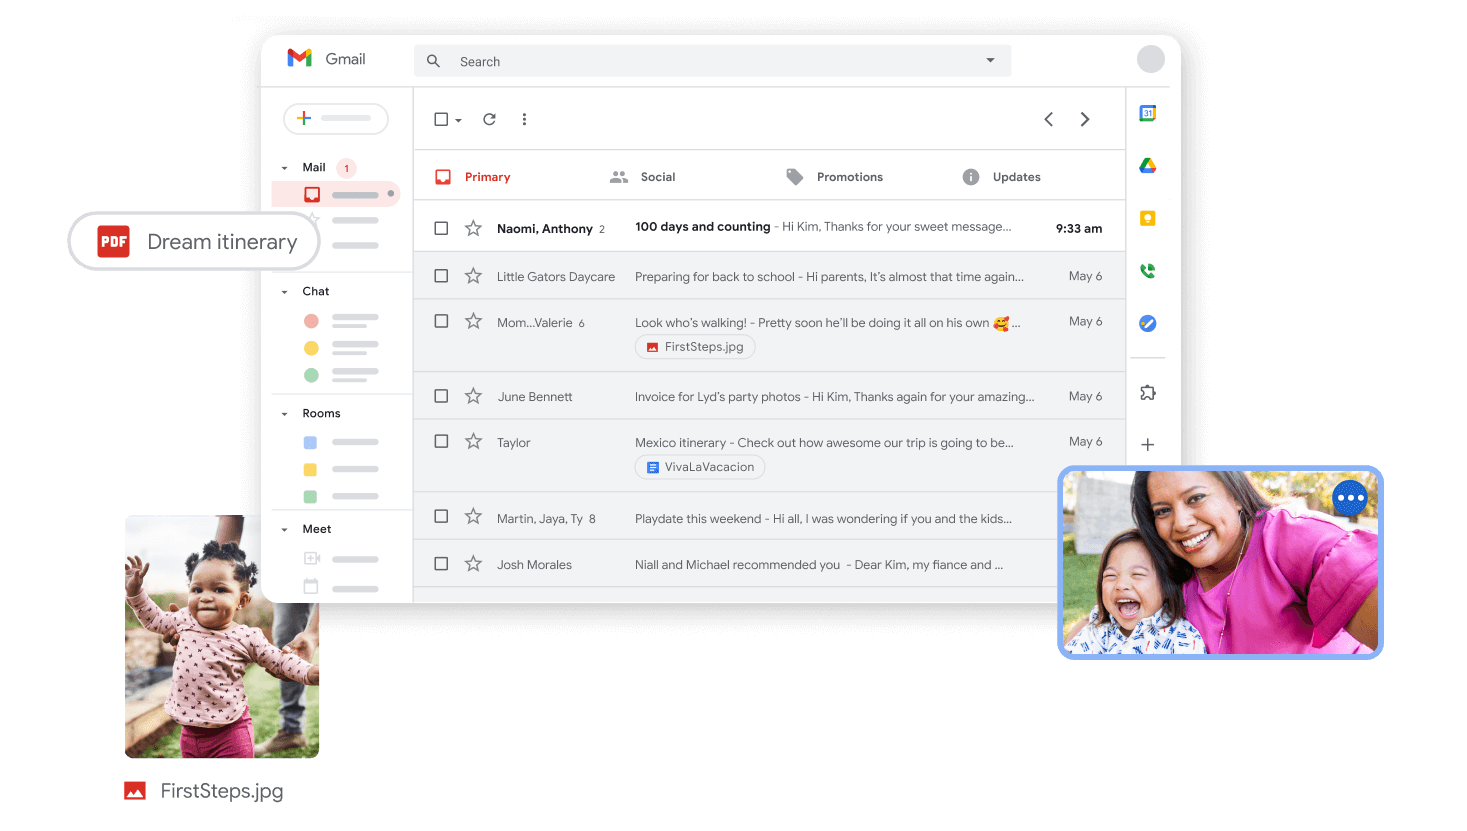 Gmail actions